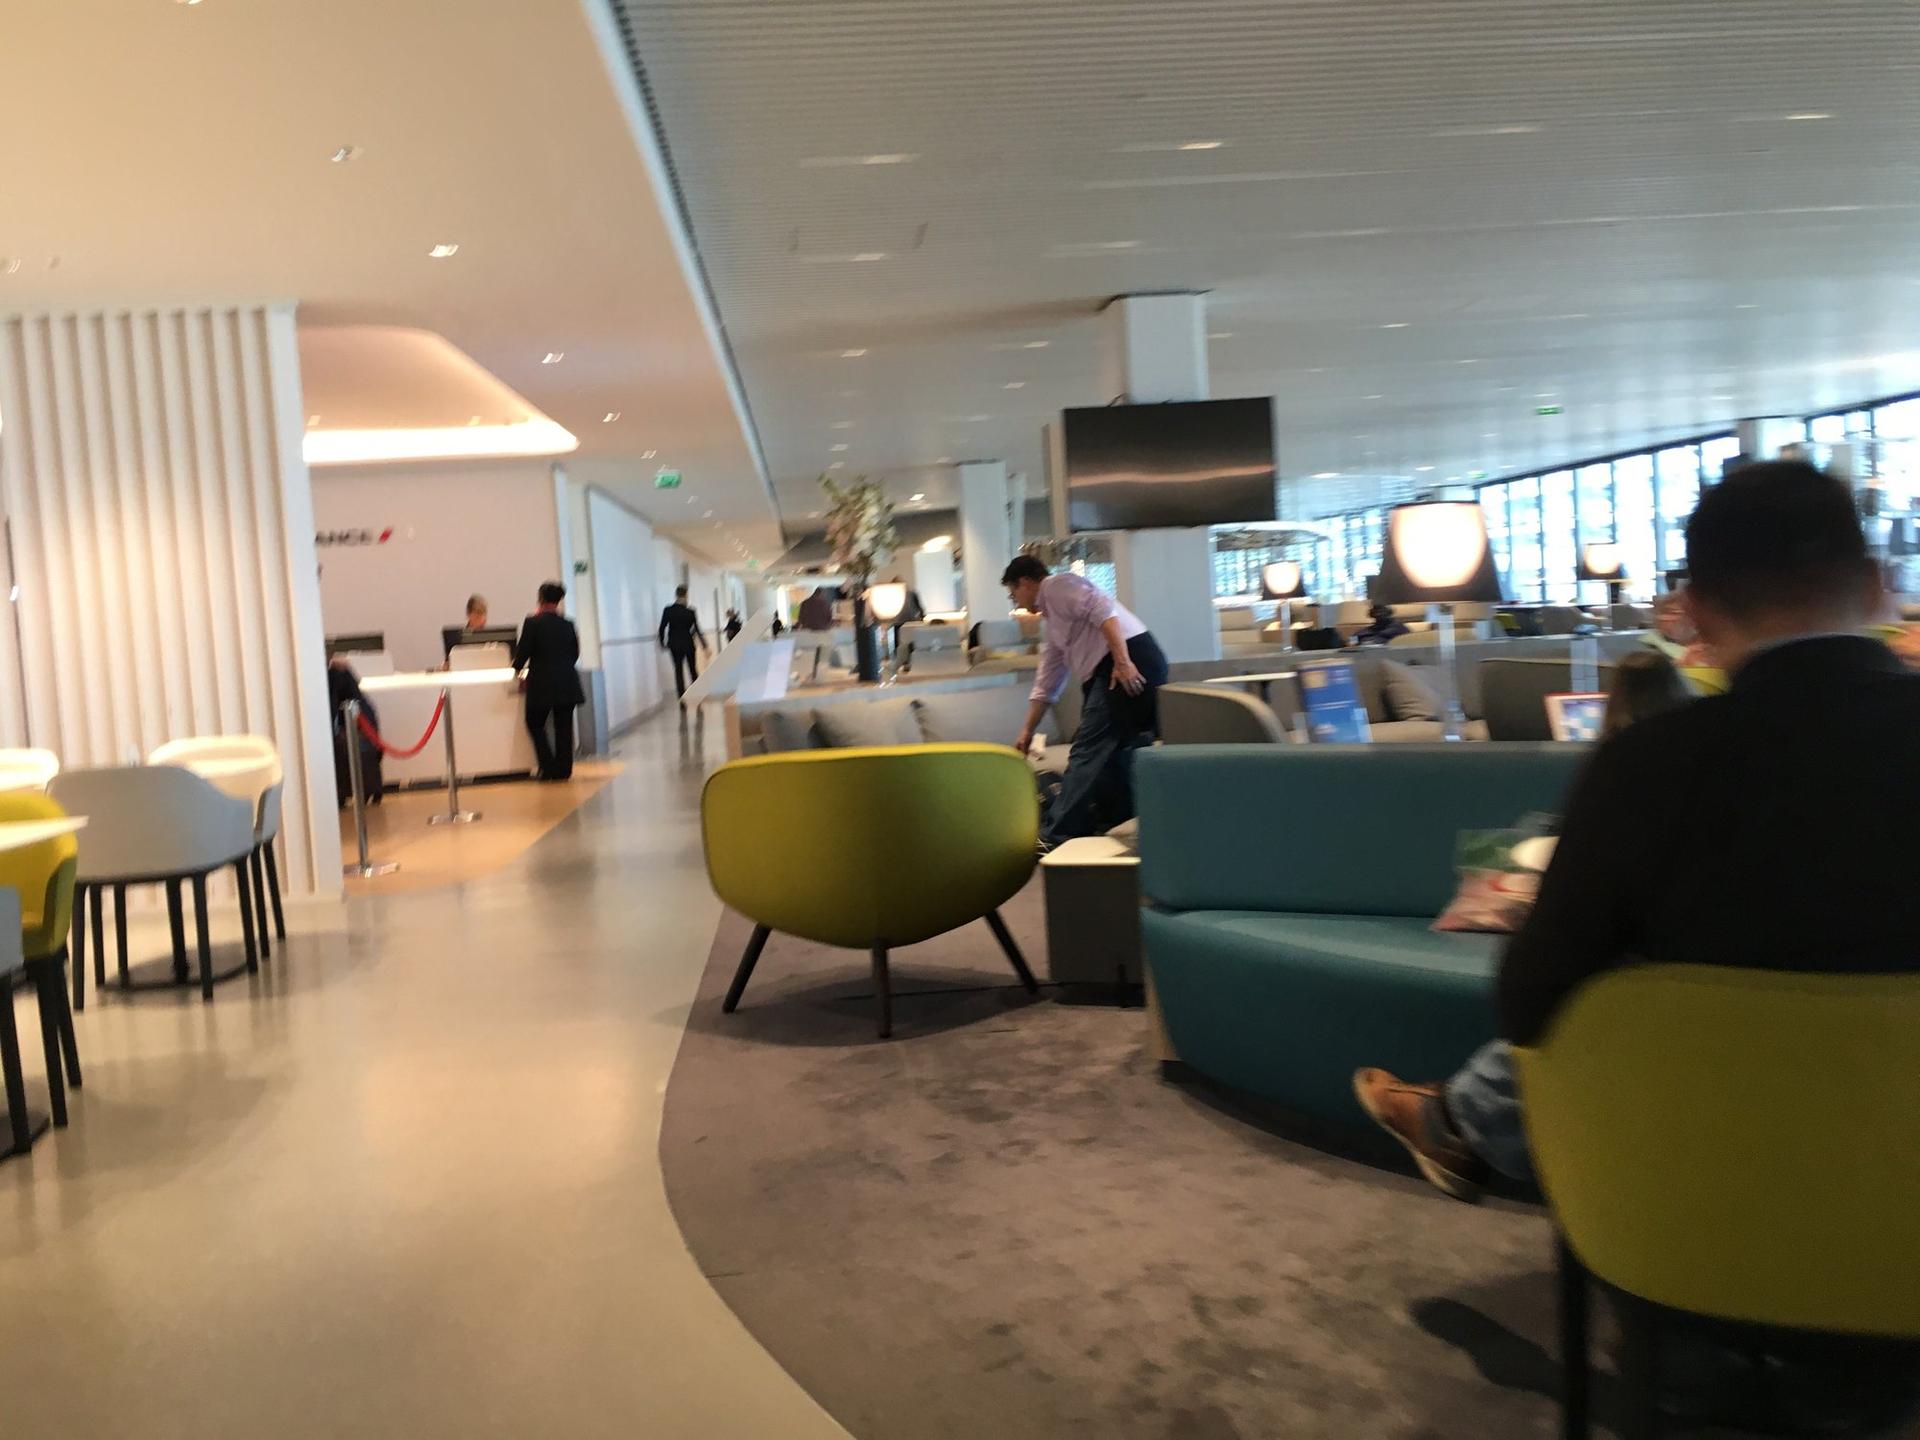 Air France Lounge (Concourse L) image 32 of 57